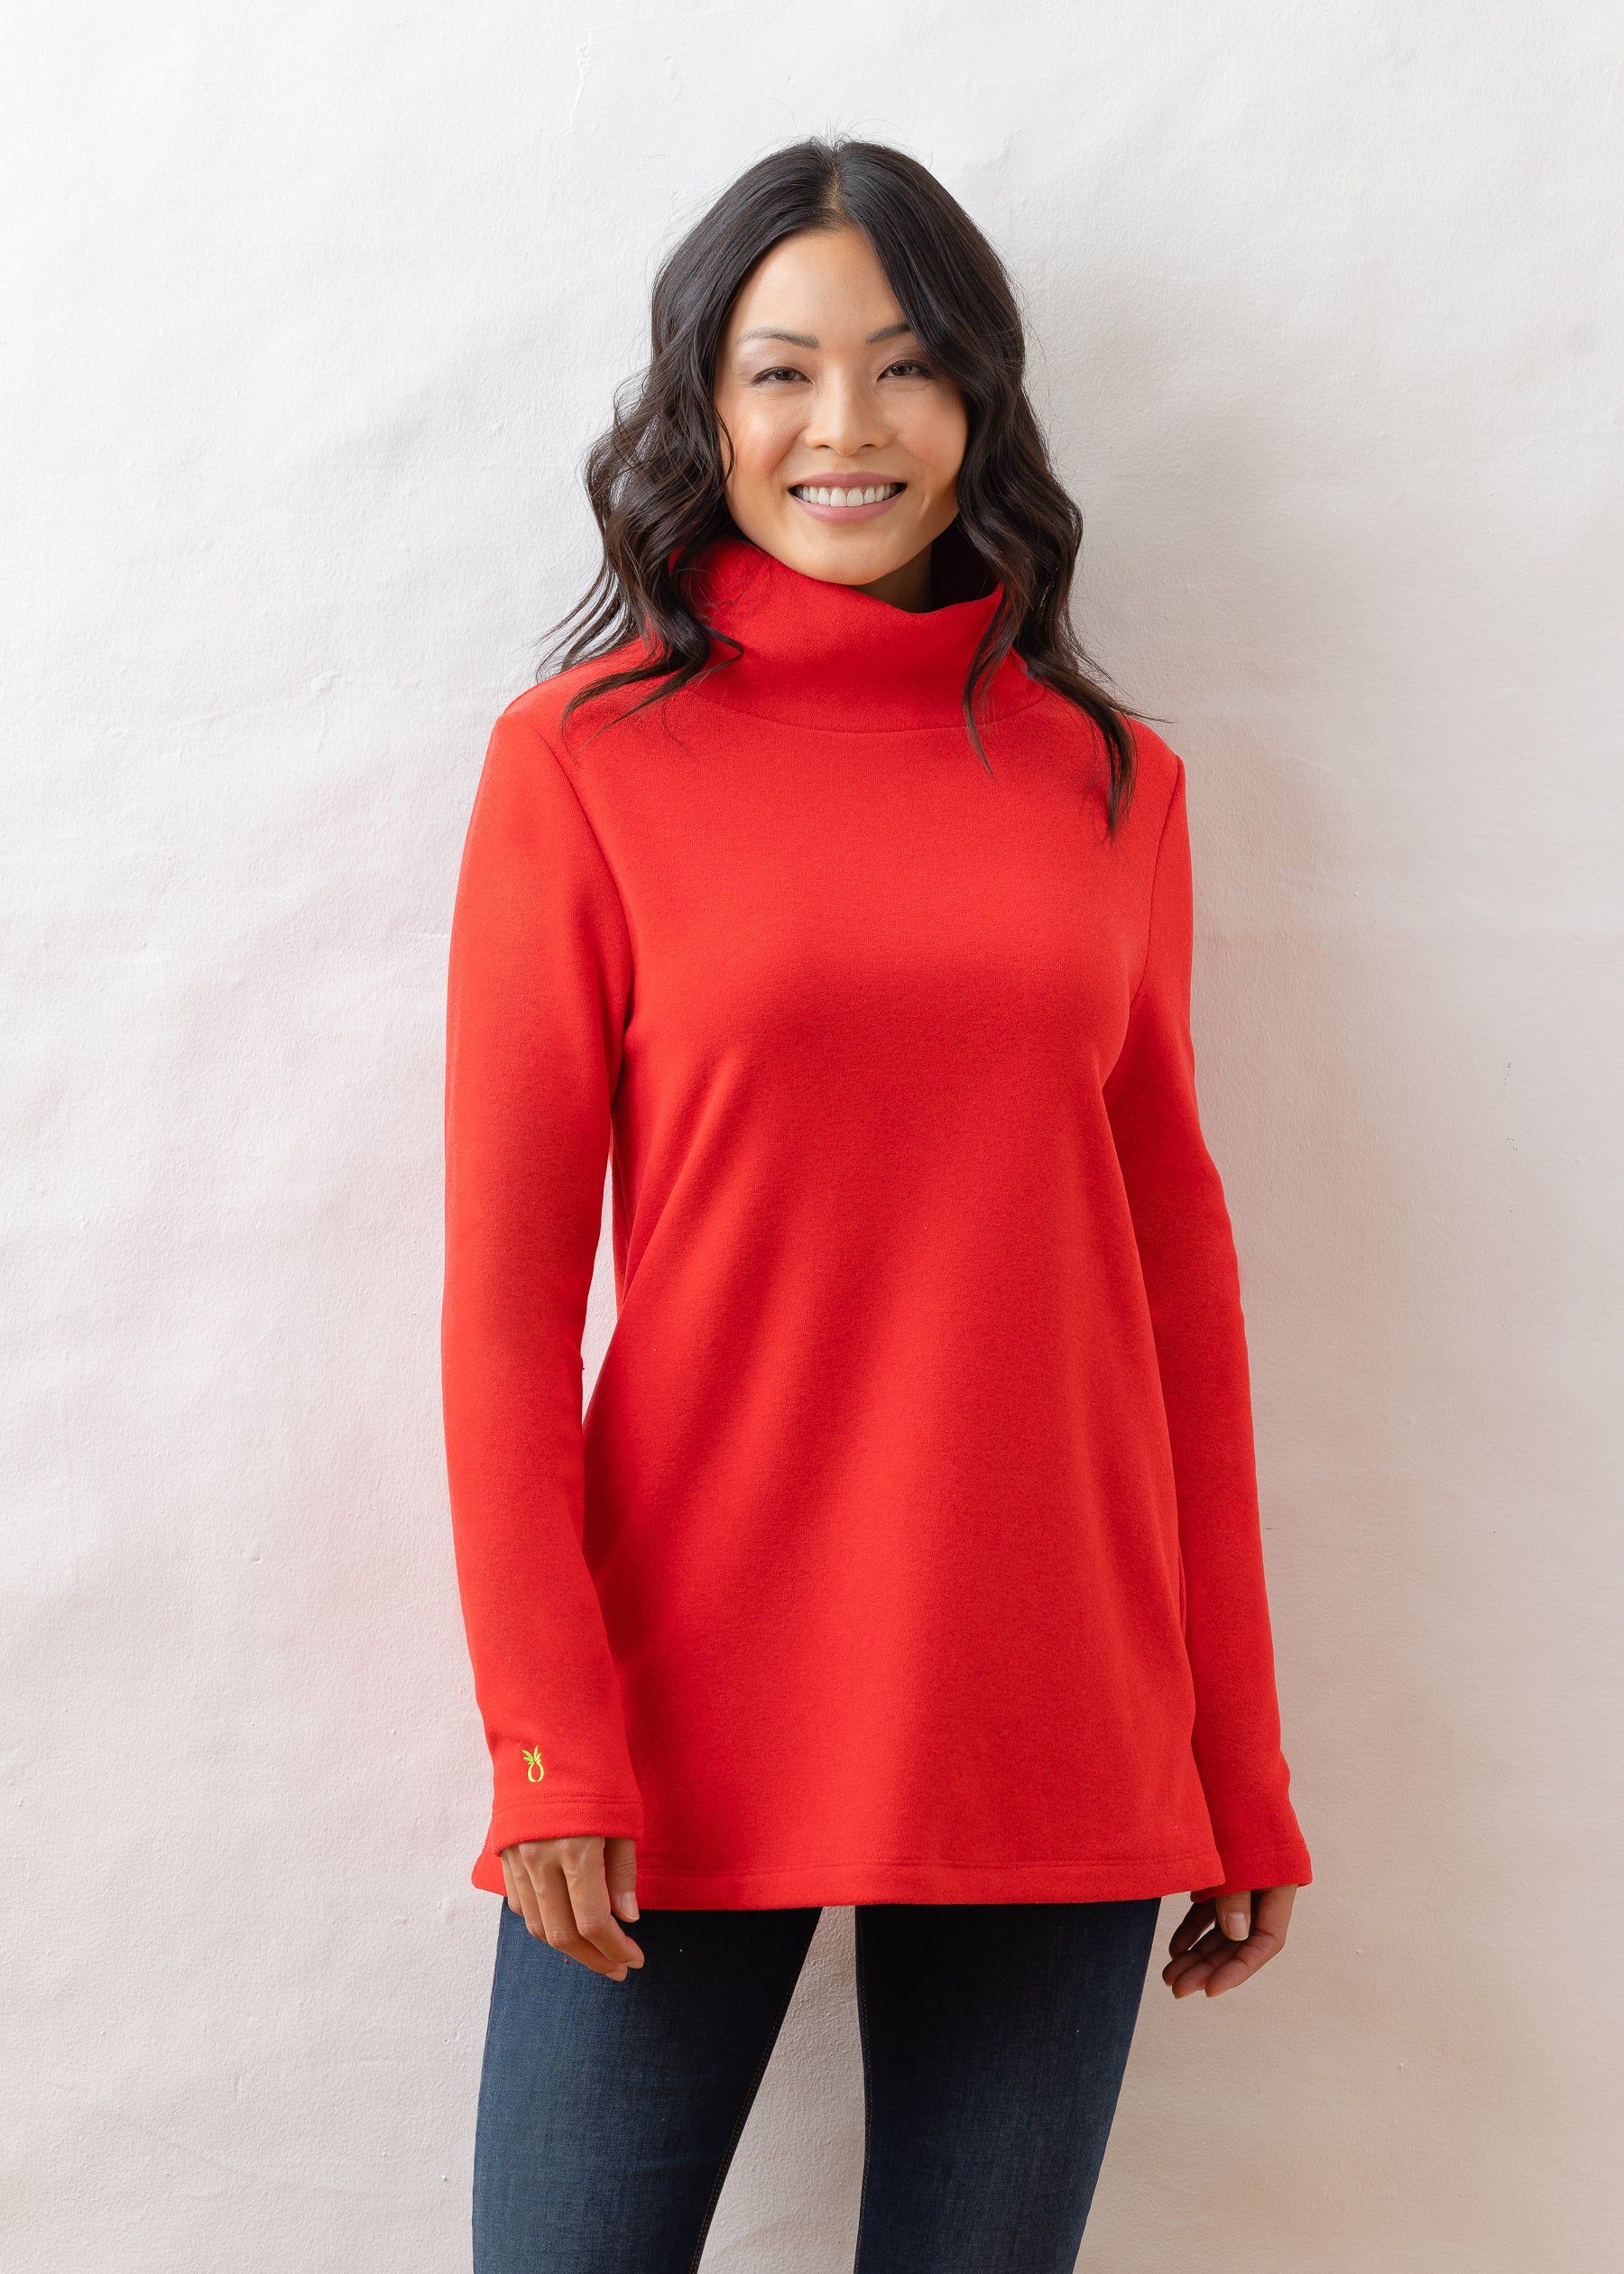 Cobble Hill Turtleneck in Terry Fleece (Red) | Dudley Stephens